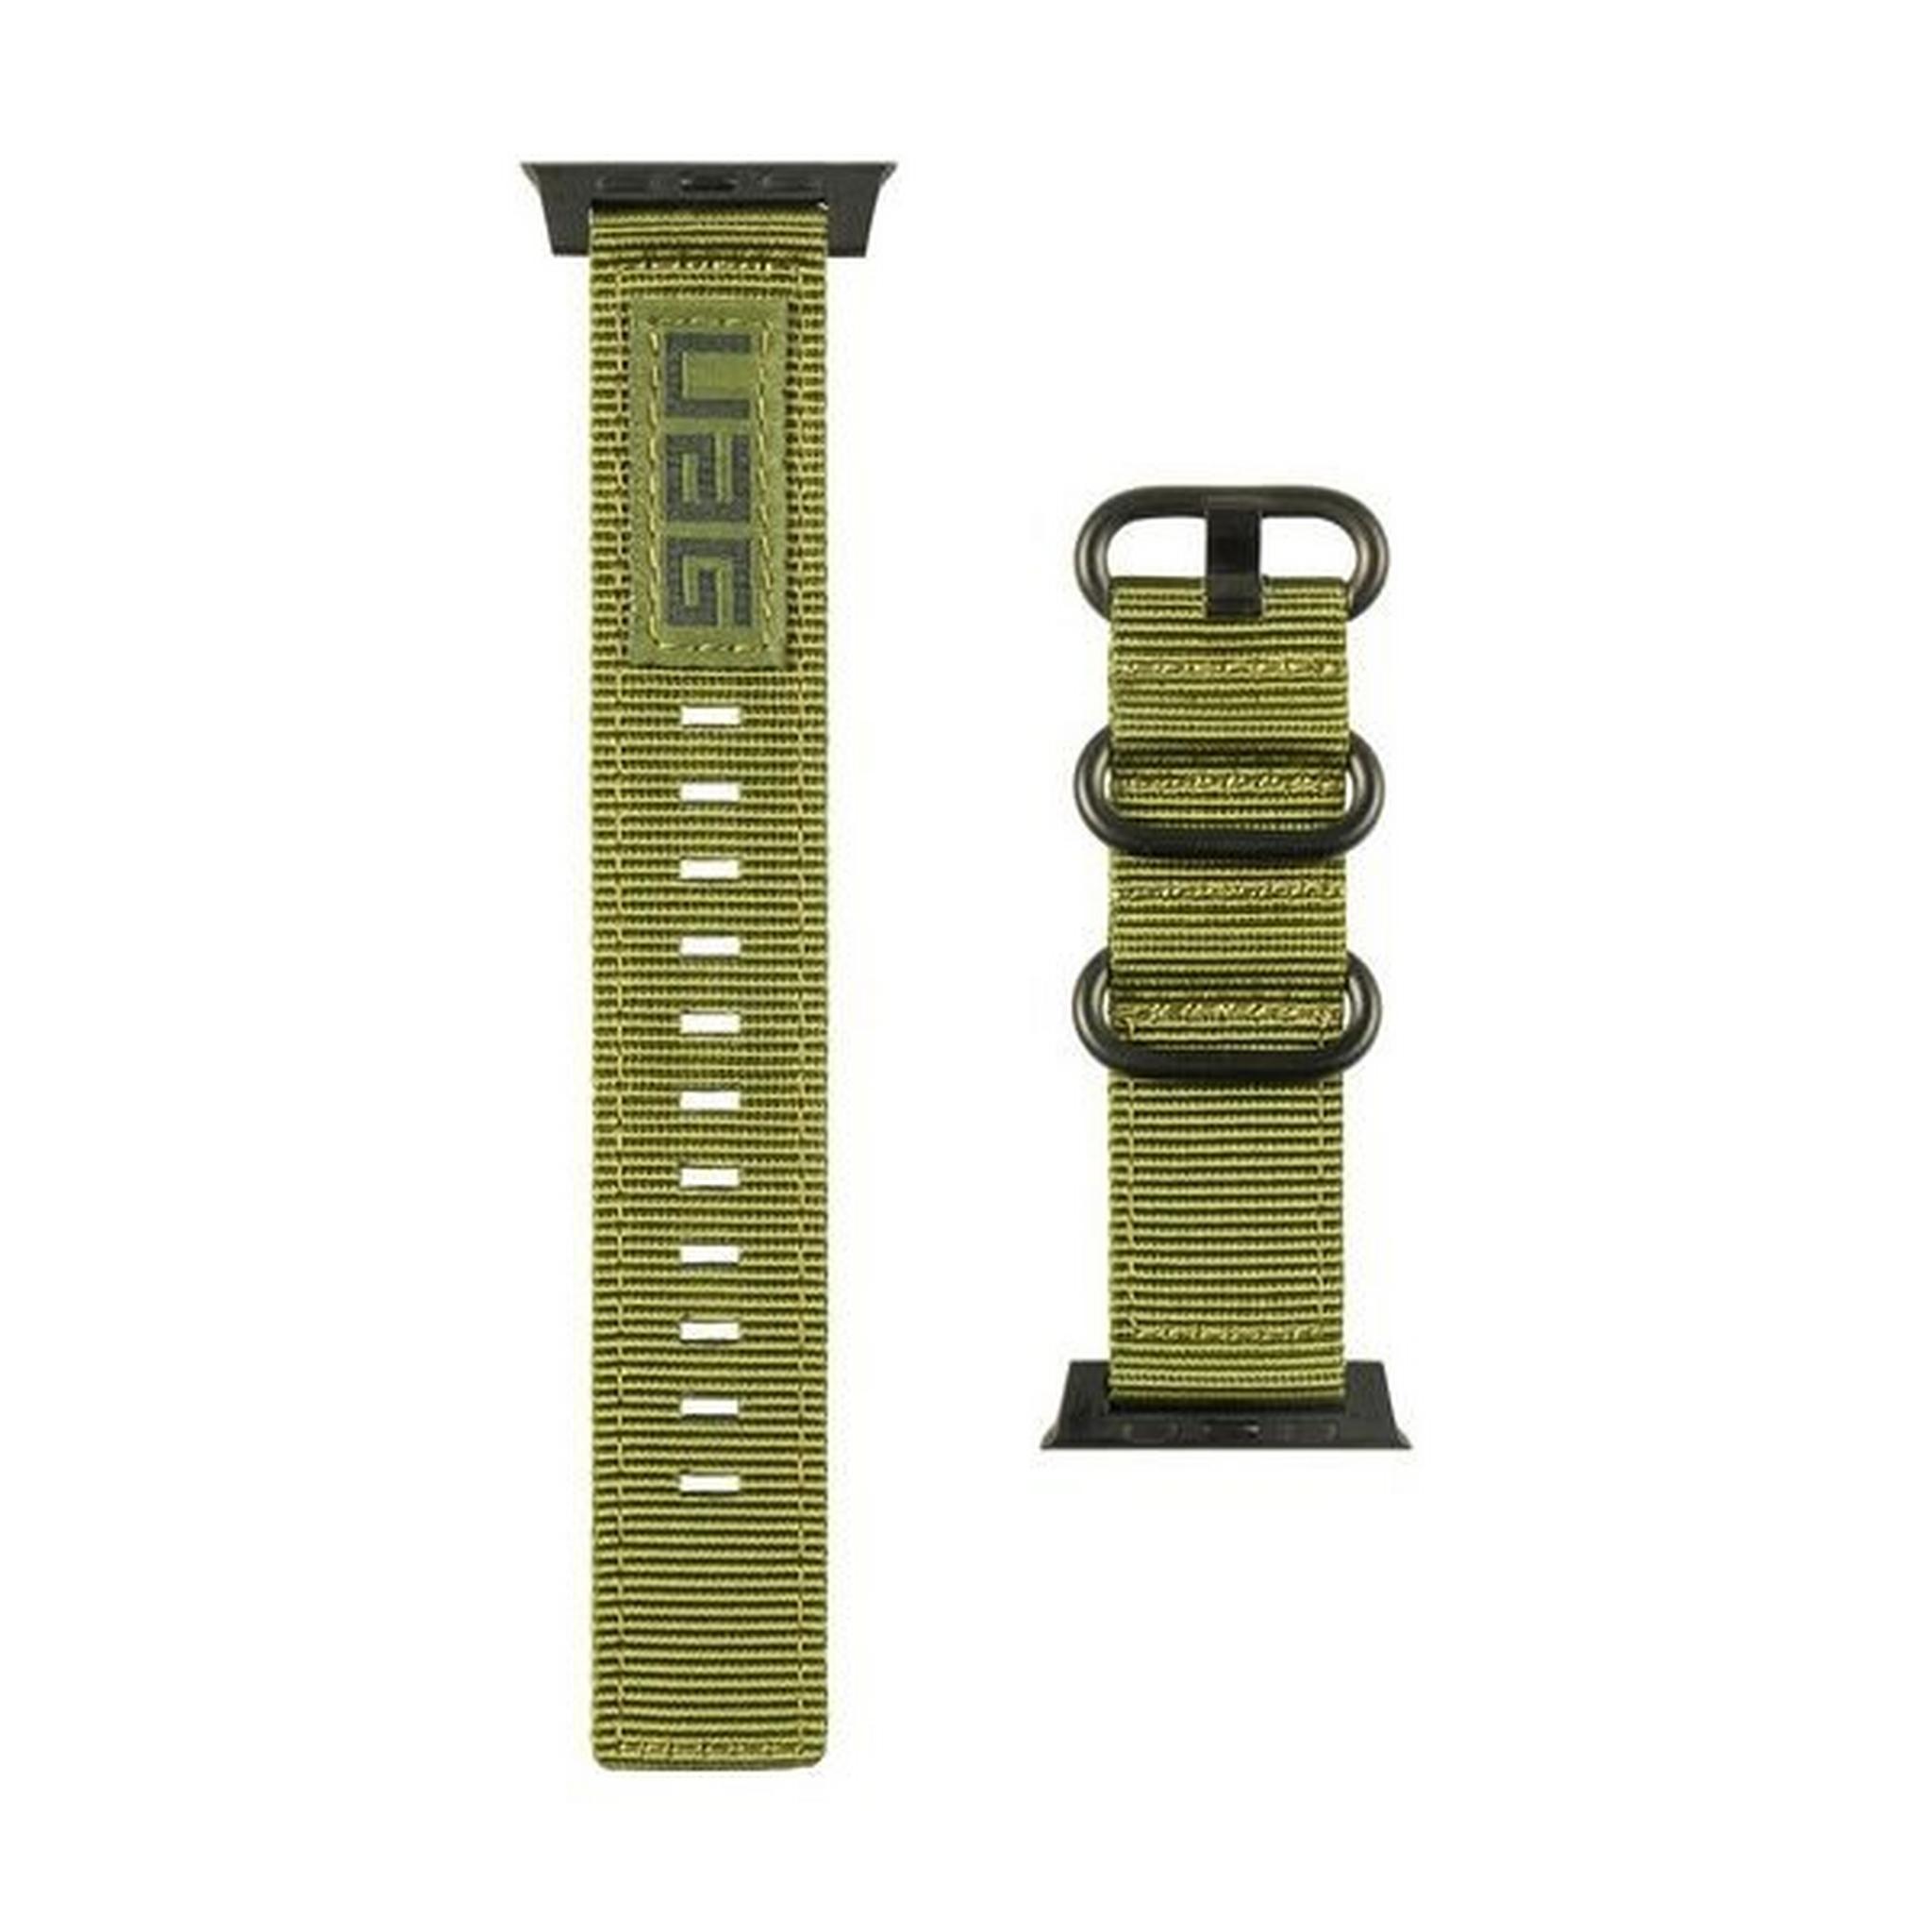 UAG Nato Watch Strap for 42mm/44mm Apple Watch - Olive Green